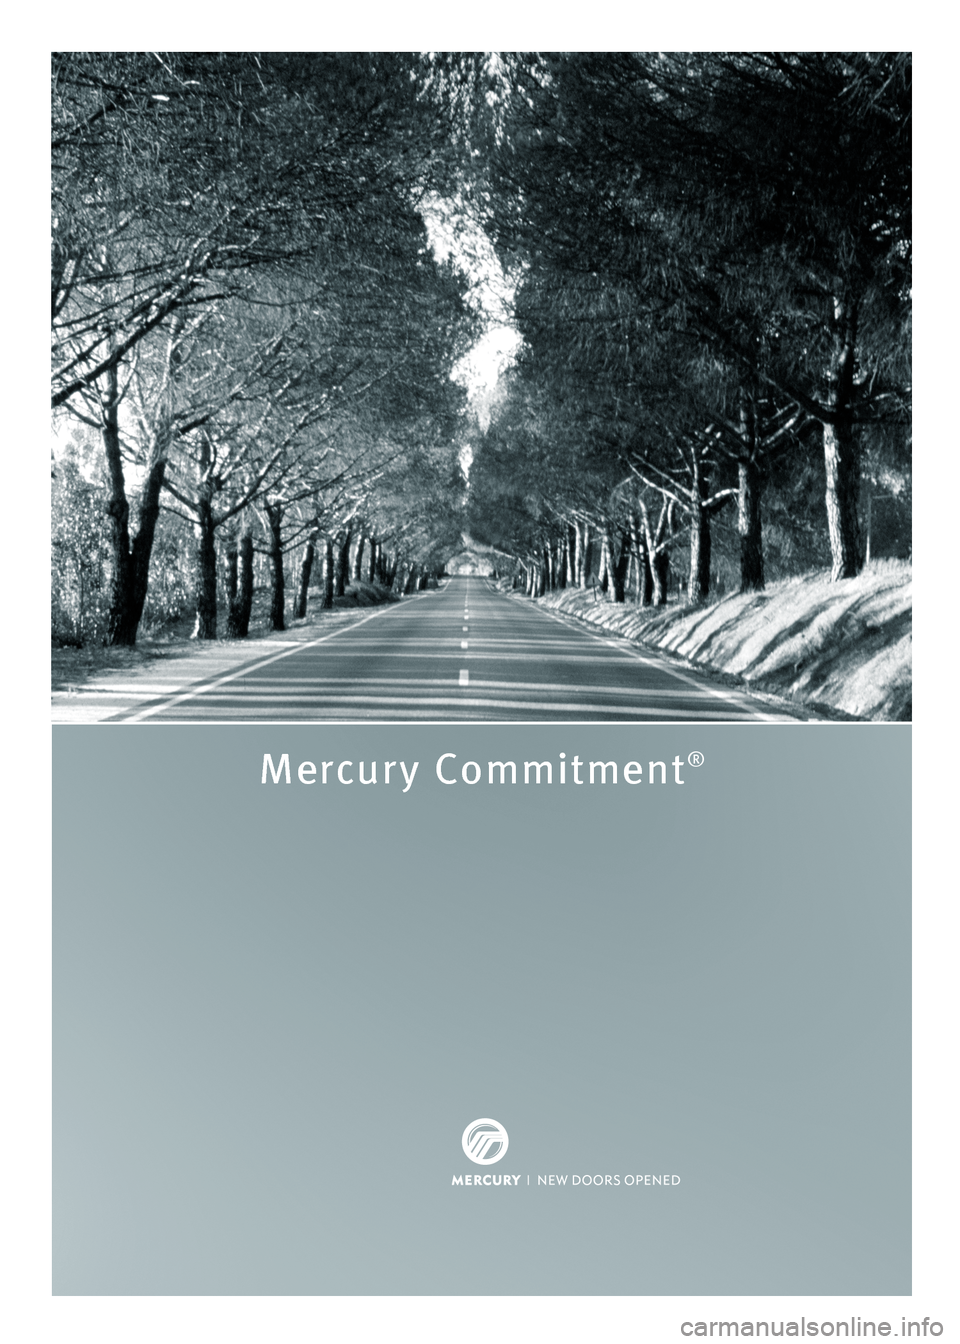 Mercury Sable 2008  Customer Assistance Guide Roadside Assistance
Mercury Commitment®
800 241-3673
Roadside Assistance
Mercury Commitment®
800 241-3673
8W3J 19328 AA 
April 2007 
First Printing
Mercury Commitment  Litho in U.S.A.
*8W3J_19328_AA